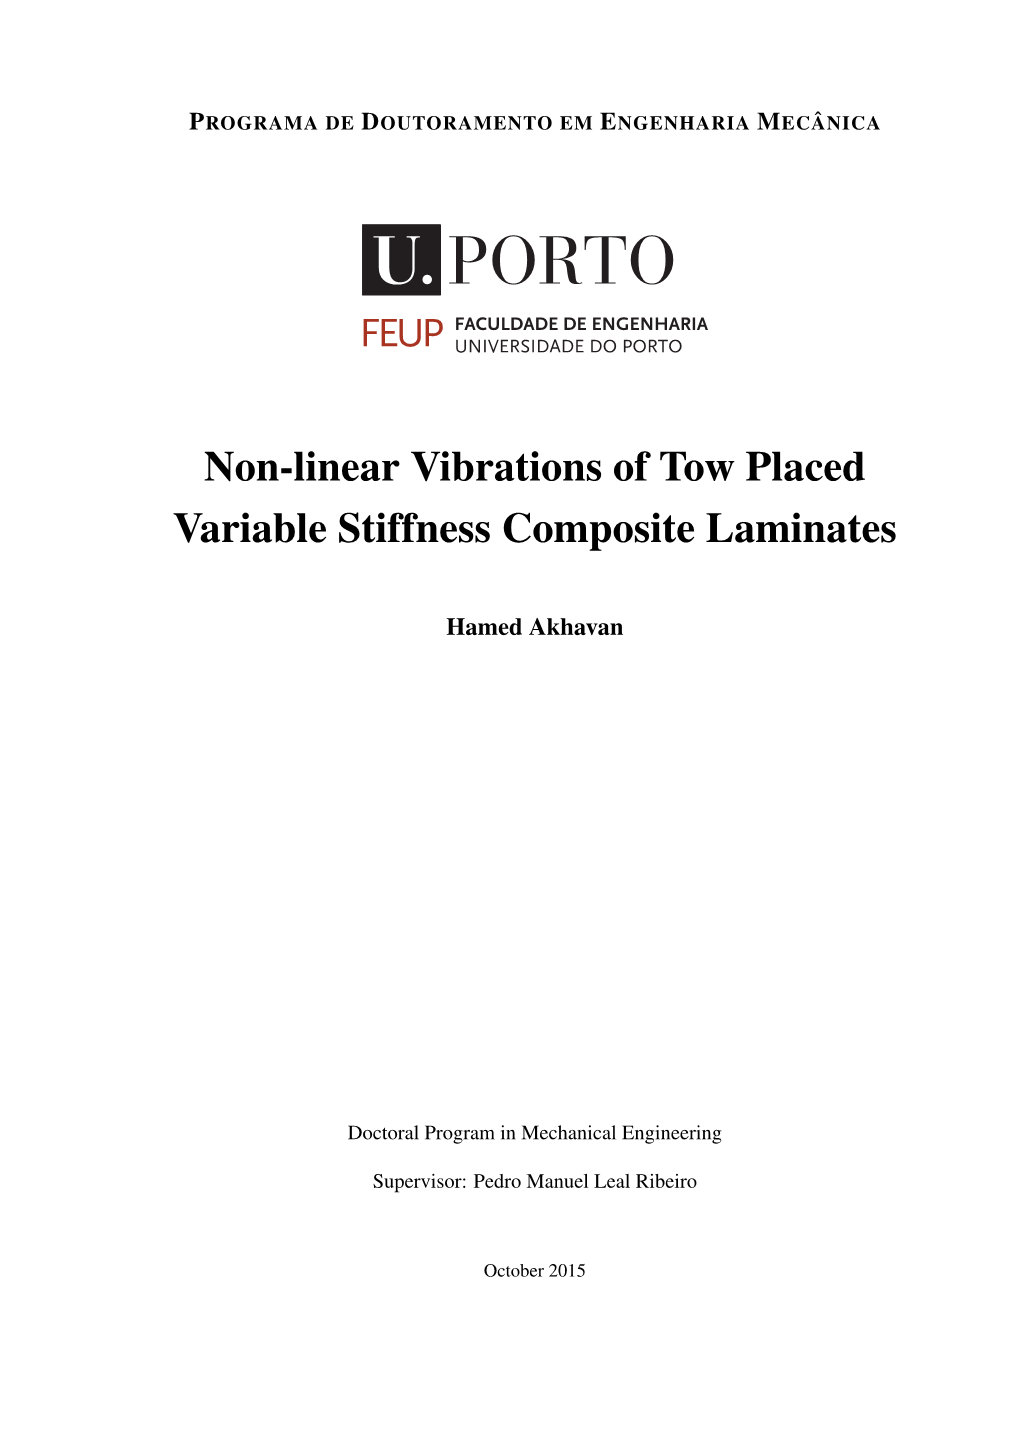 Non-Linear Vibrations of Tow Placed Variable Stiffness Composite Laminates